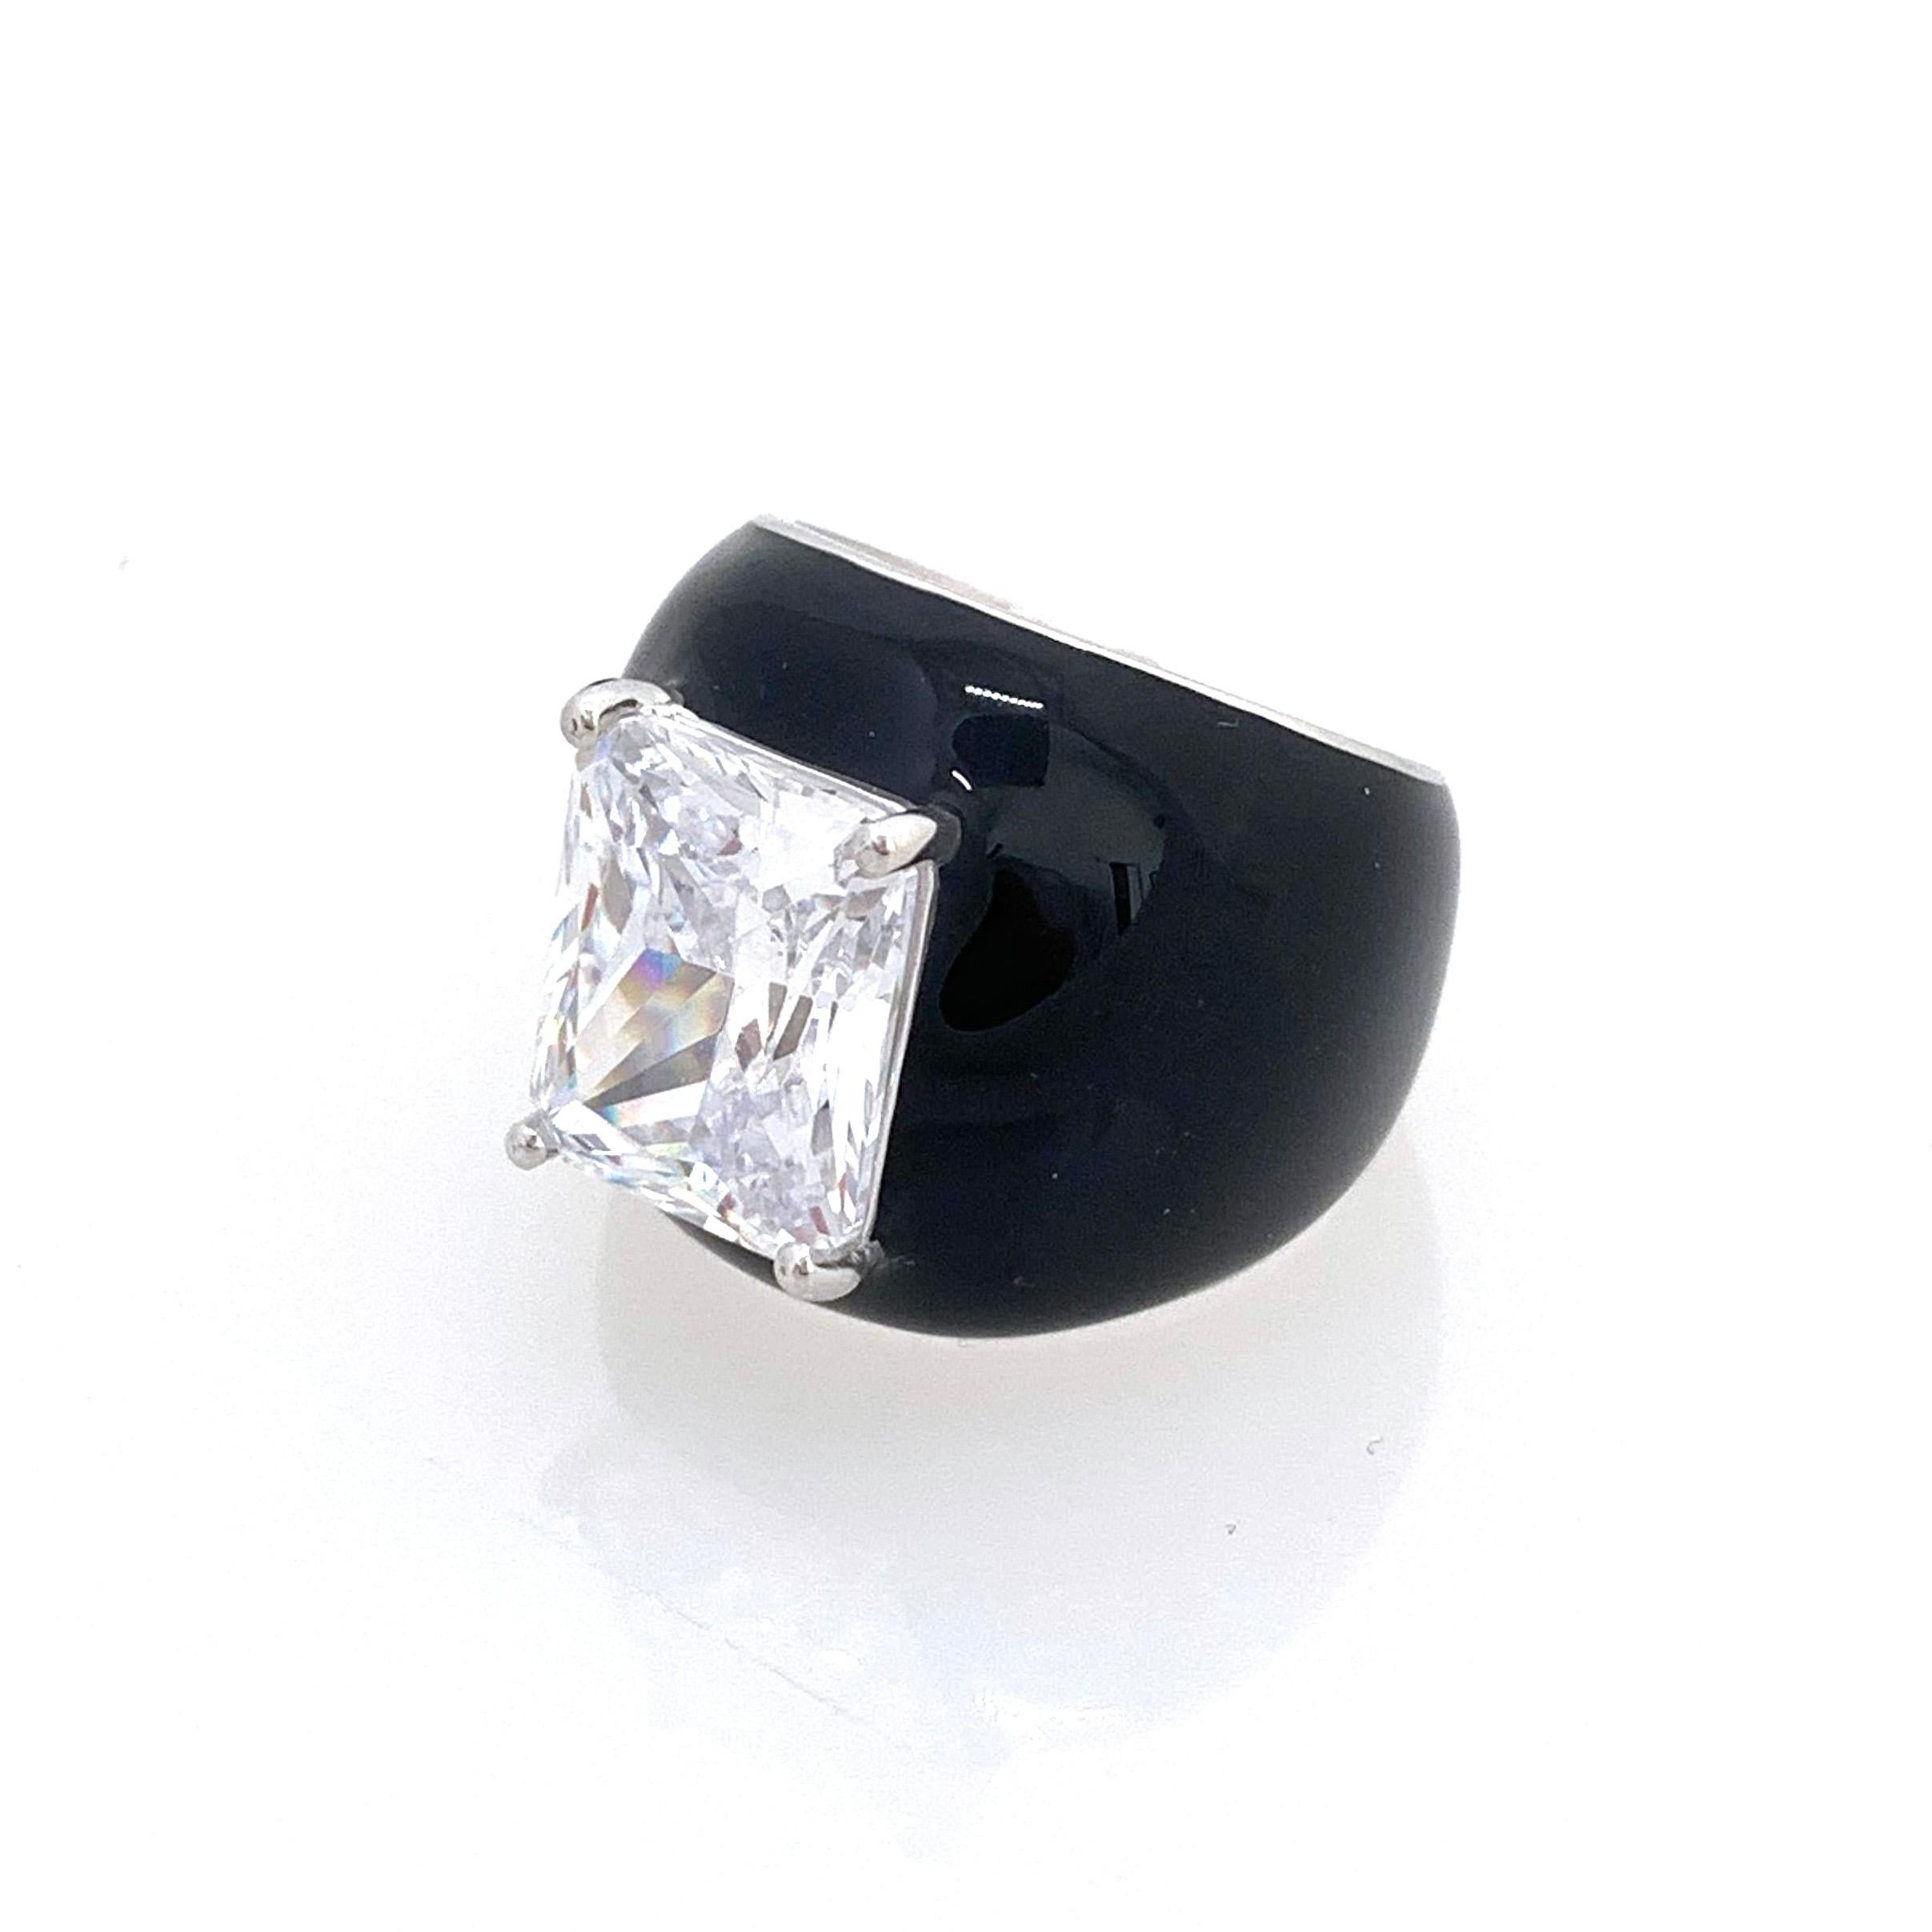 Bijoux Num Faux Diamond Black Enamel Bombe Dome Ring

This bold cocktail ring features beautiful top quality 6.5ct emerald-cut simulated diamond cubic zirconia, handset in platinum rhodium plated sterling silver. The entire ring is sheathed in shiny